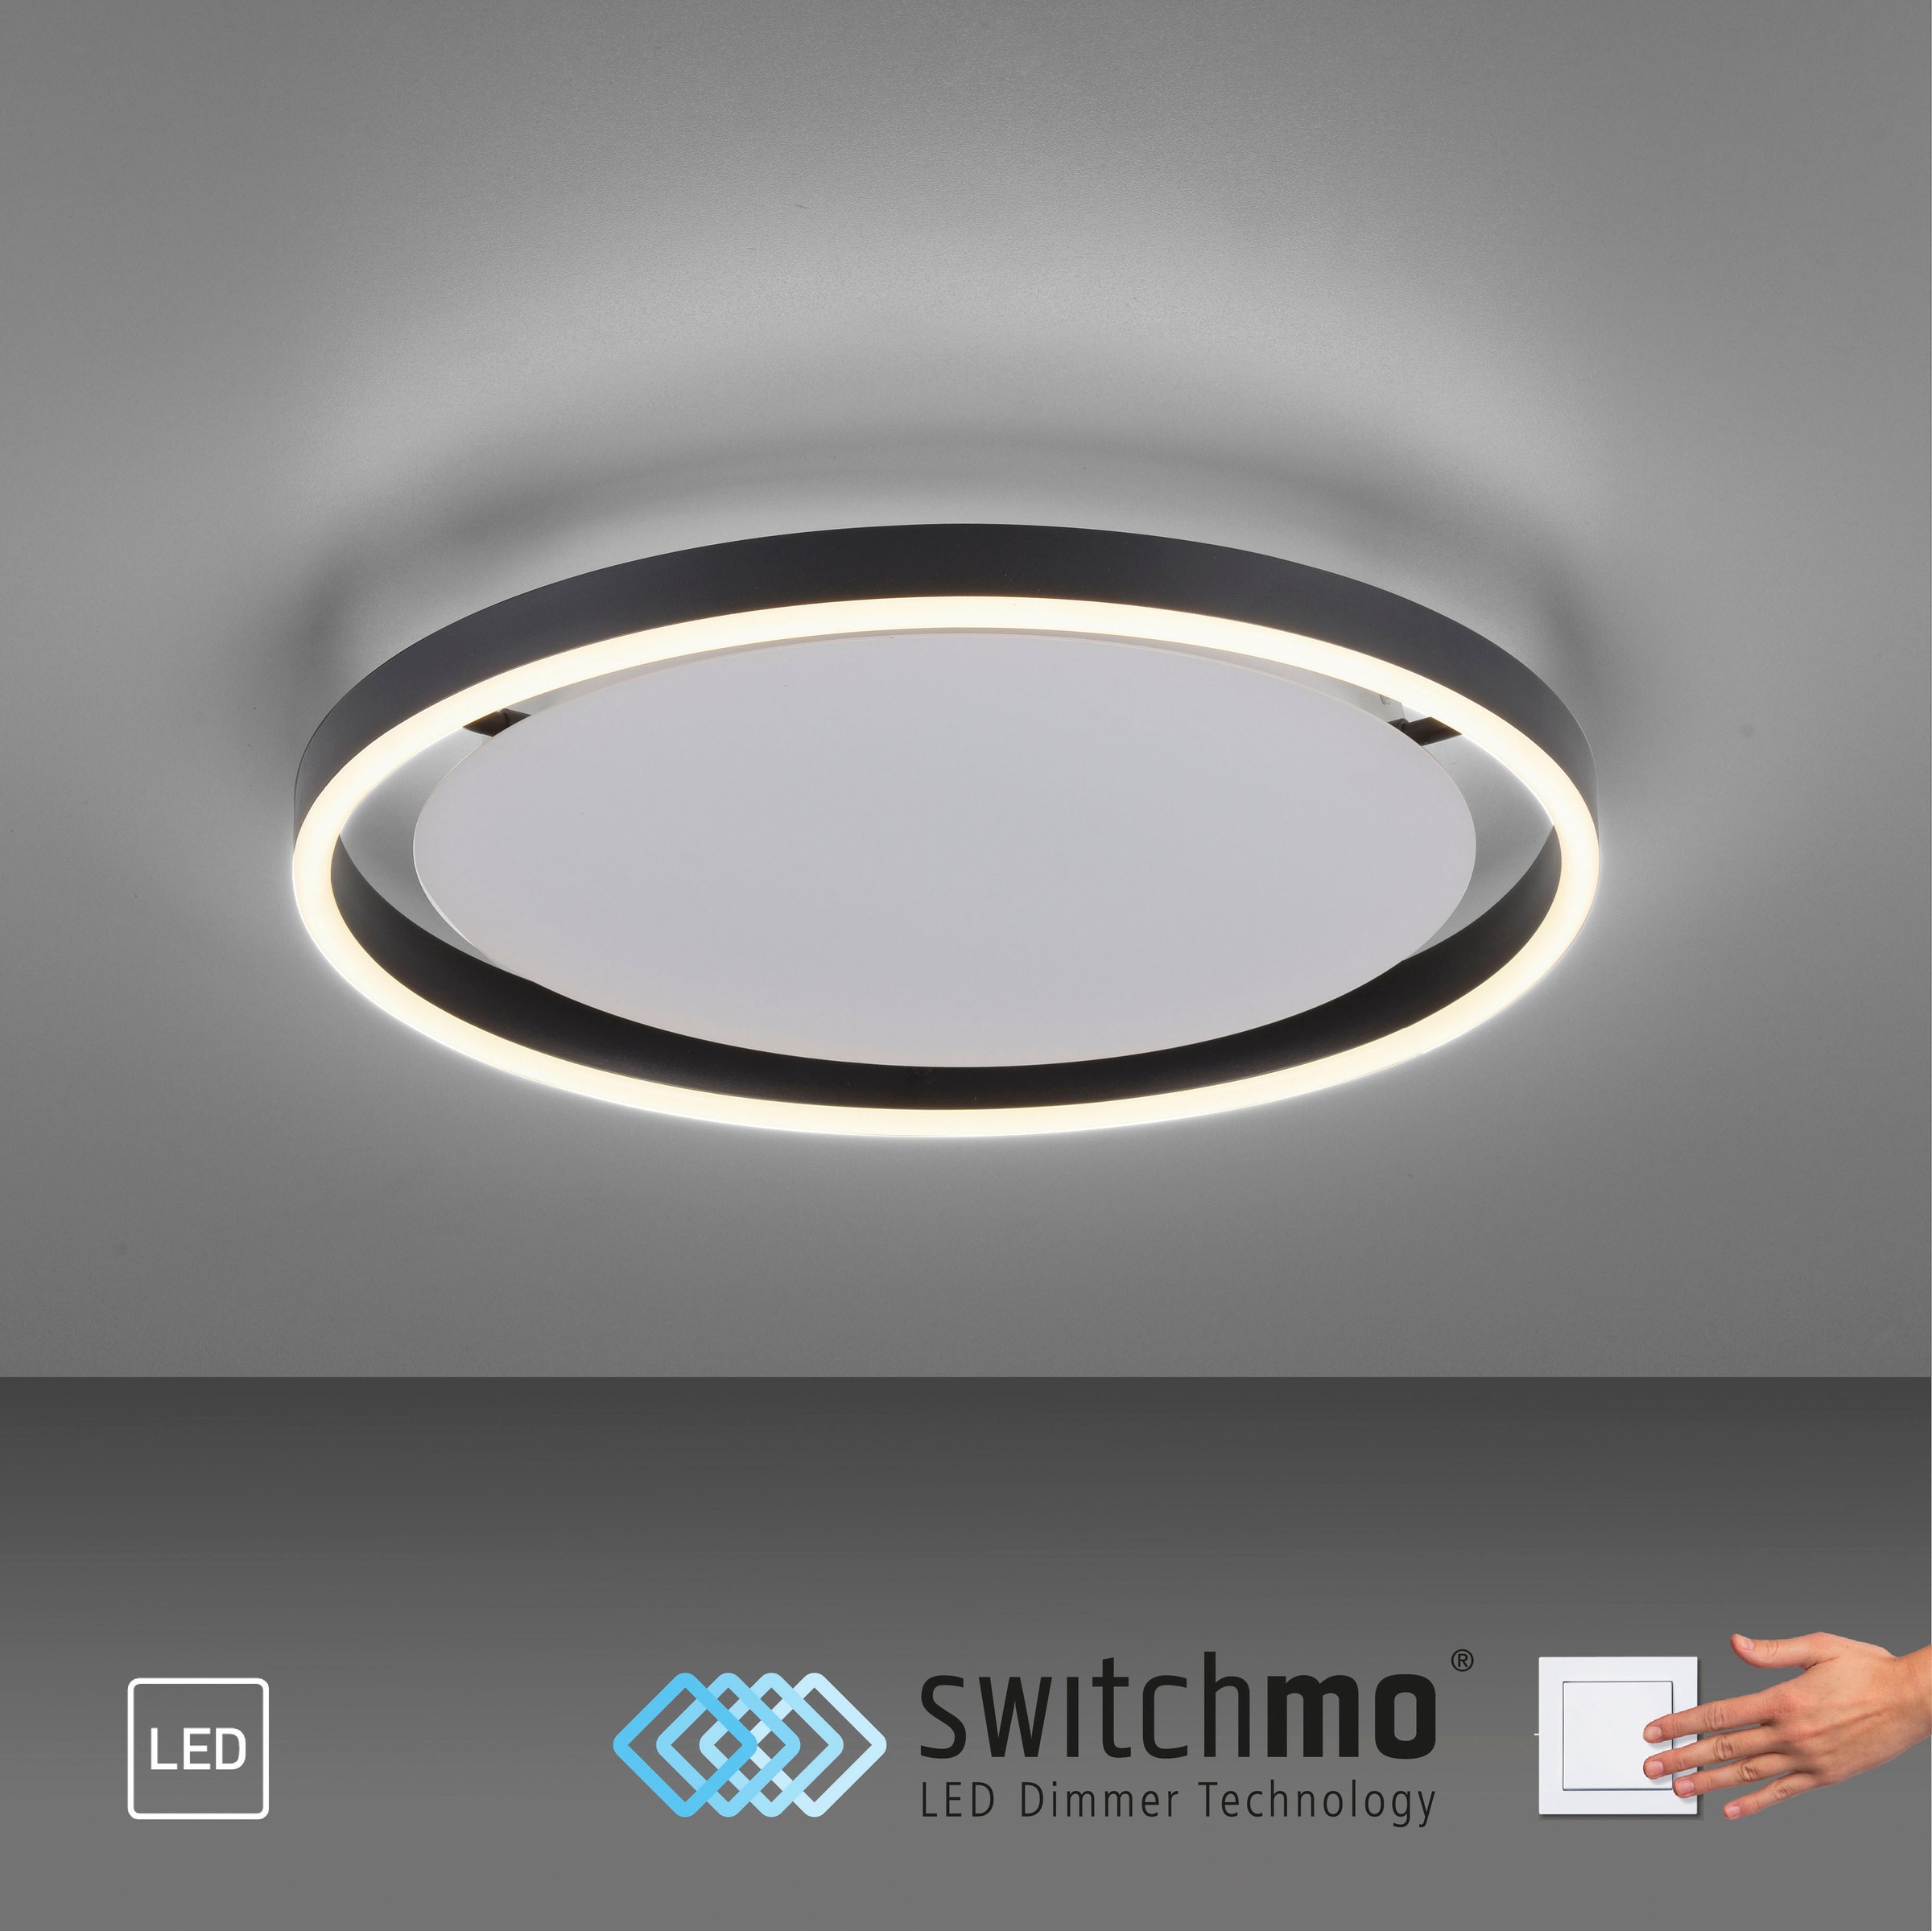 JUST LIGHT Deckenleuchte »RITUS«, 1 LED, Switchmo, BAUR Switchmo flammig-flammig, dimmbar, dimmbar, 